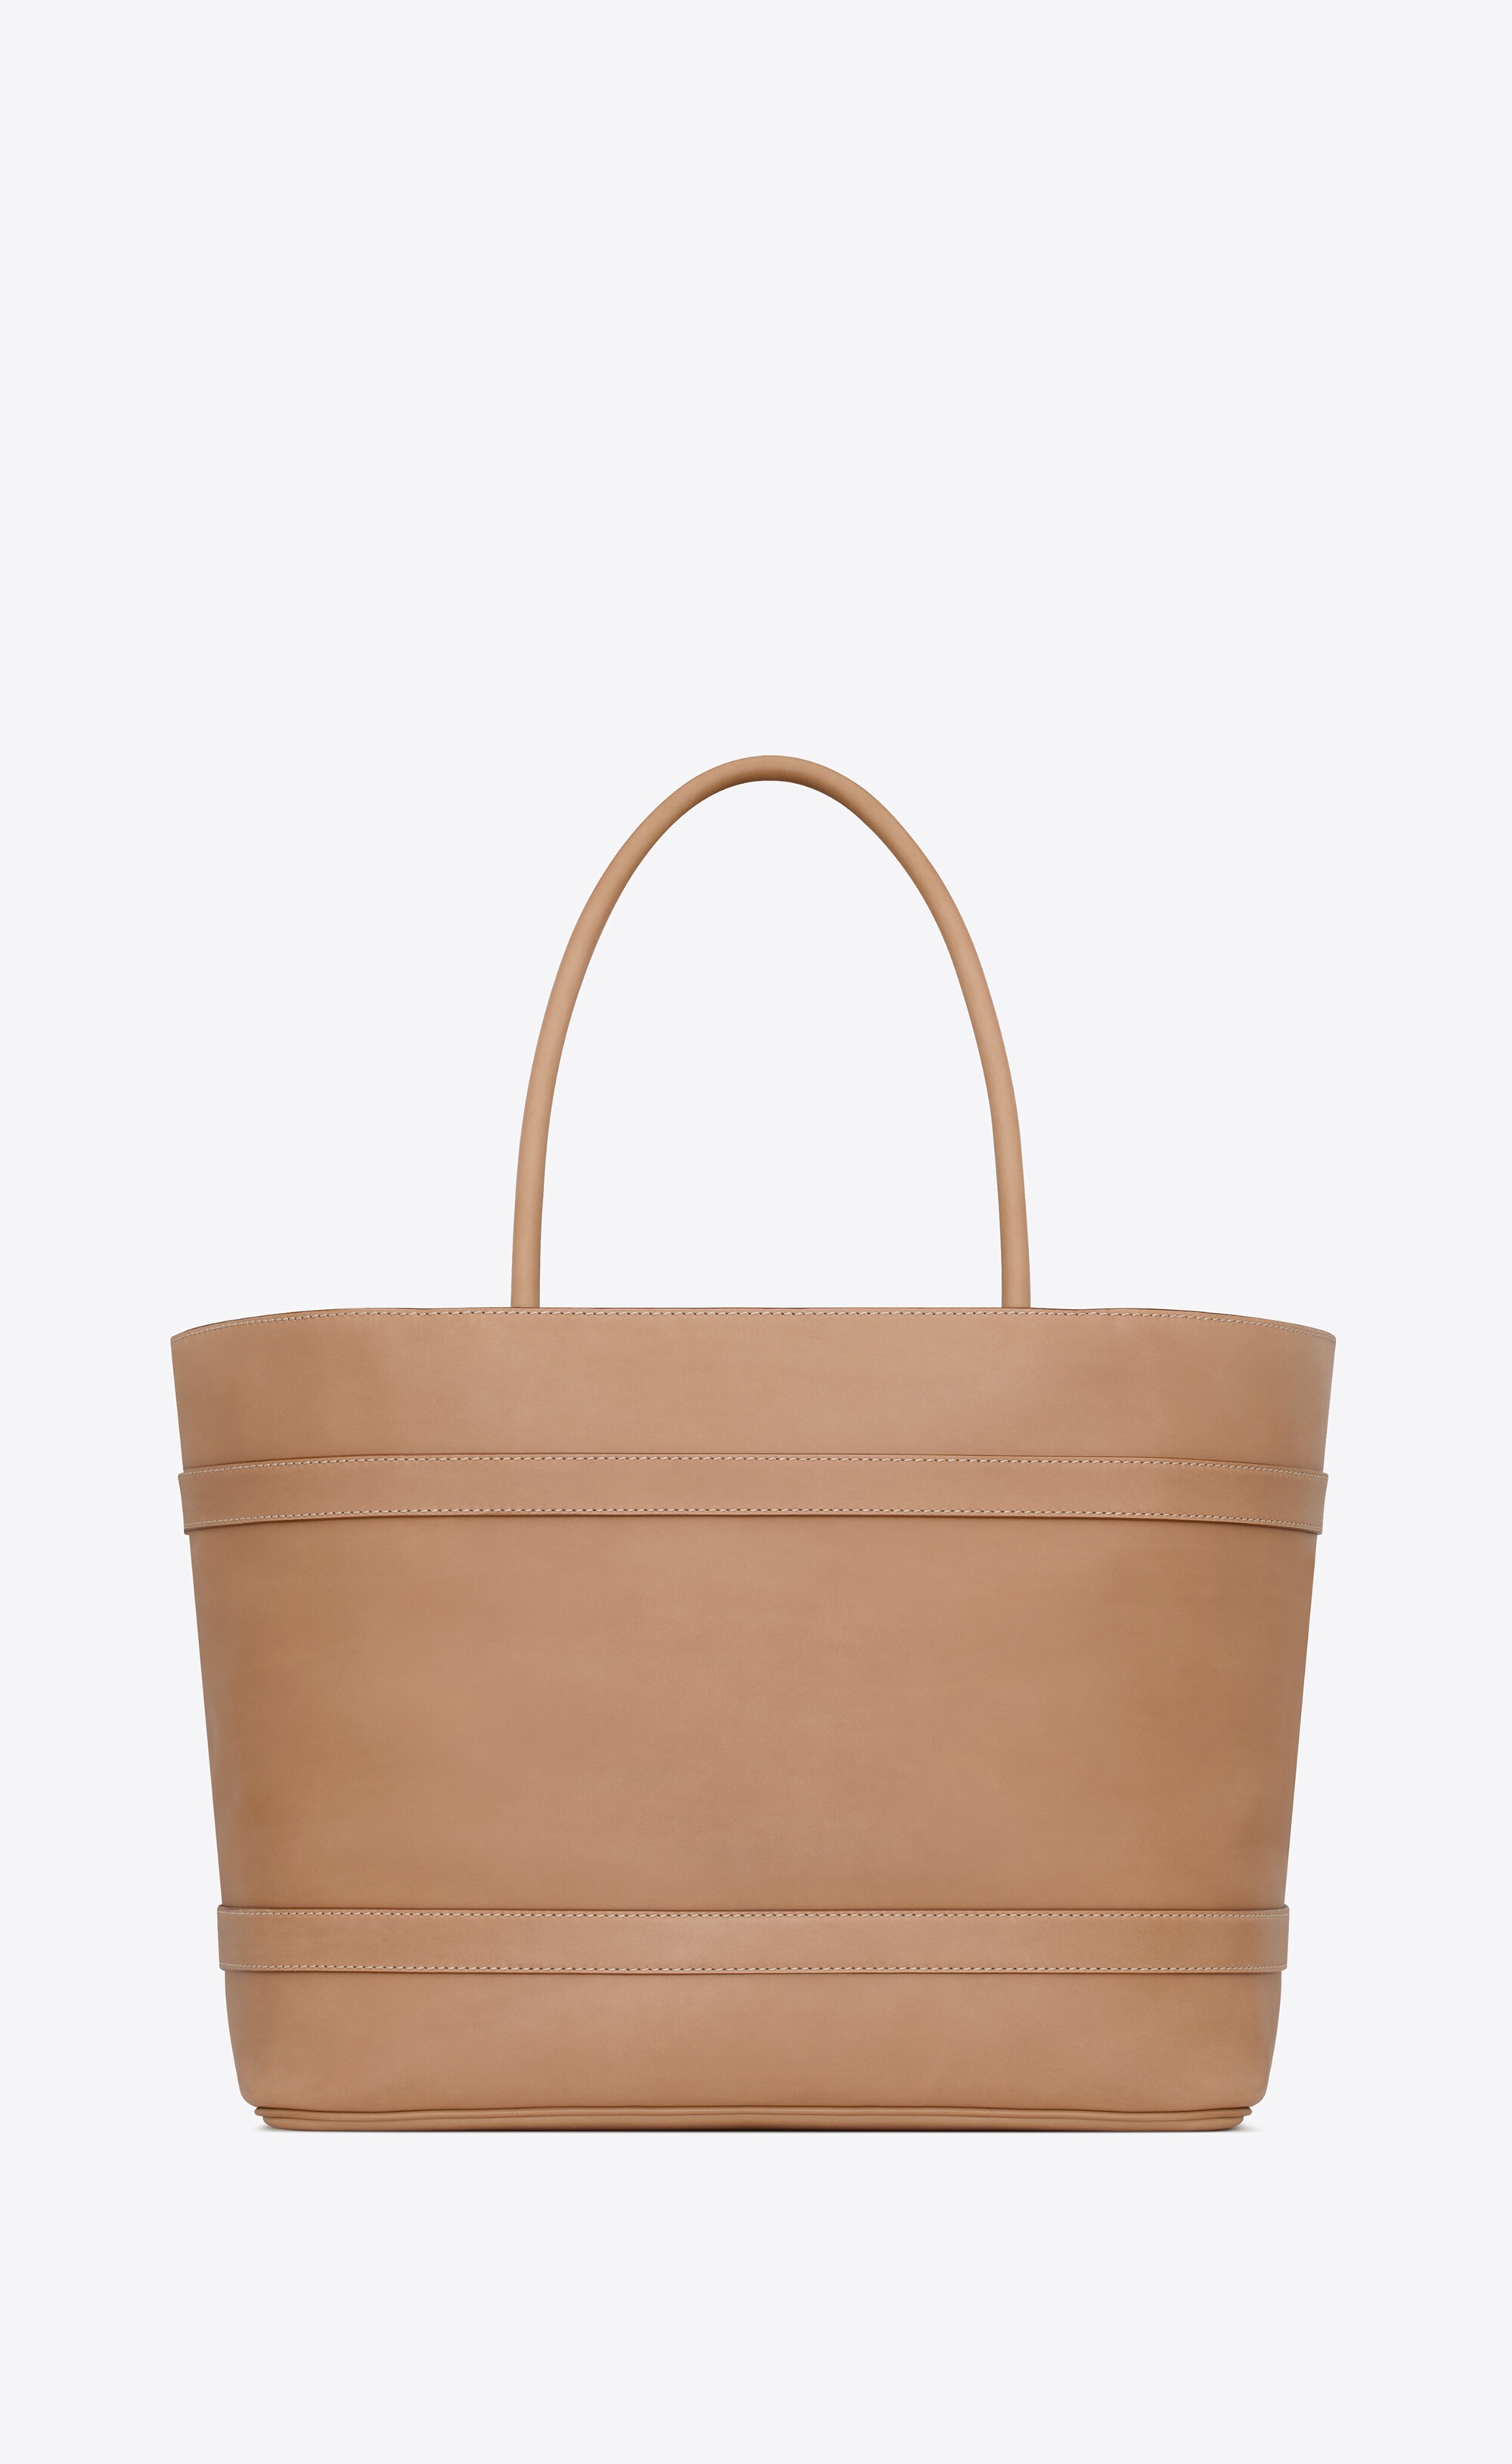 rive gauche tote bag in vegetable-tanned leather - 3